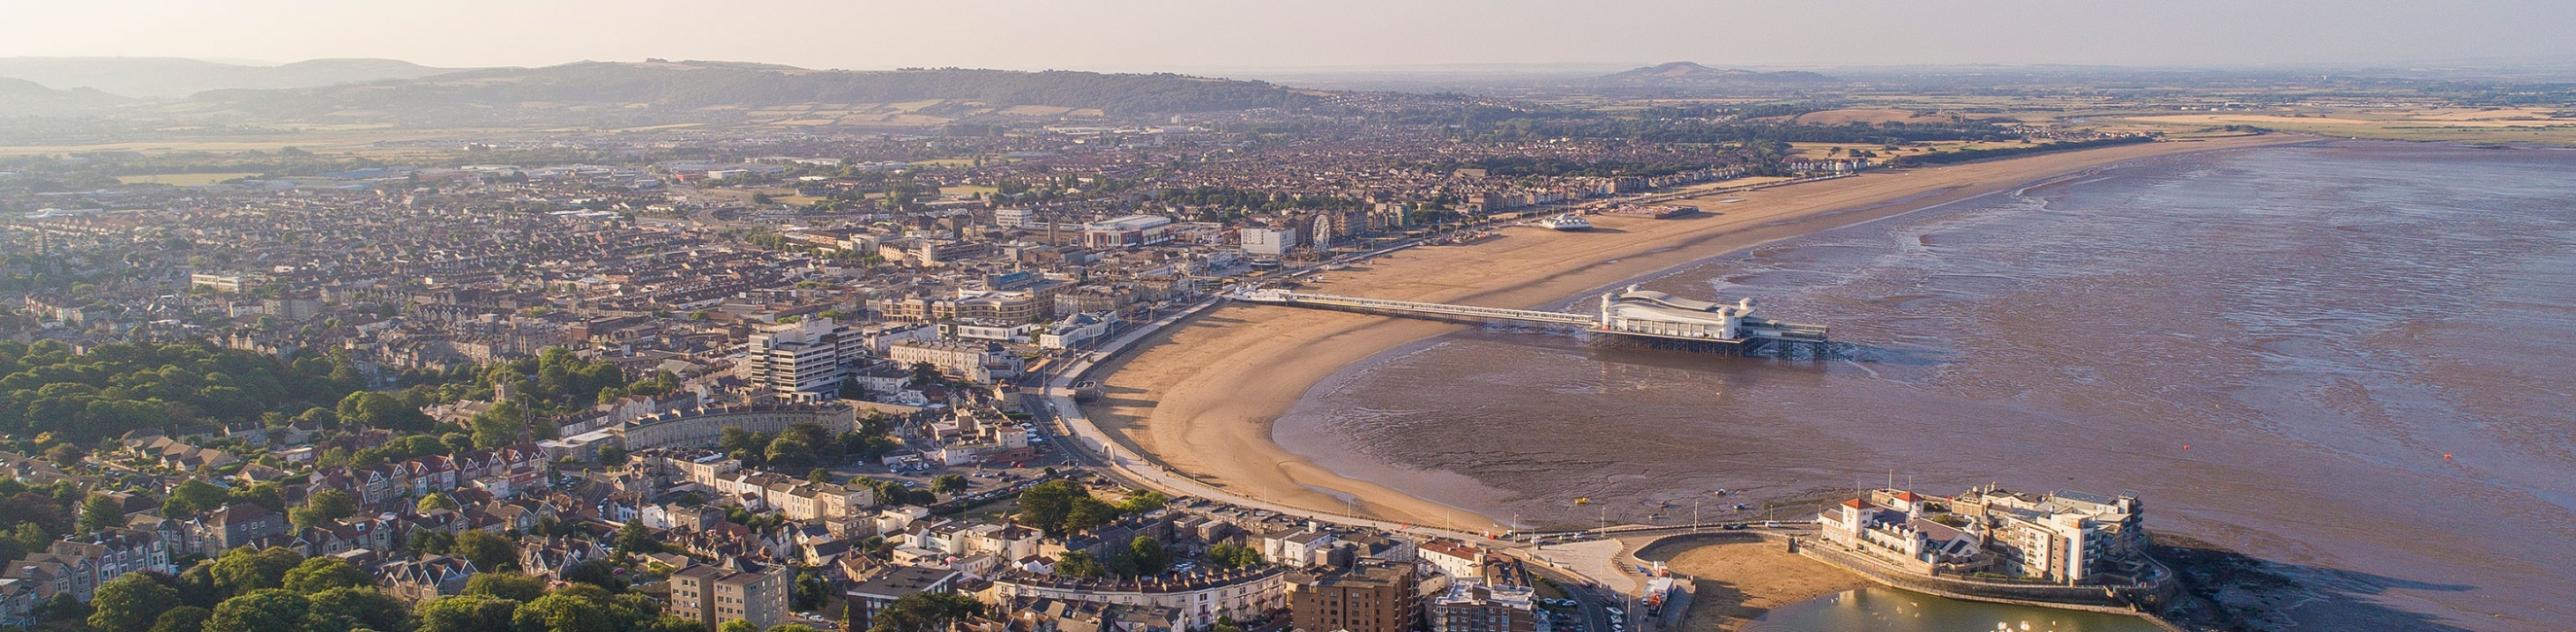 Drone of Weston Seafront